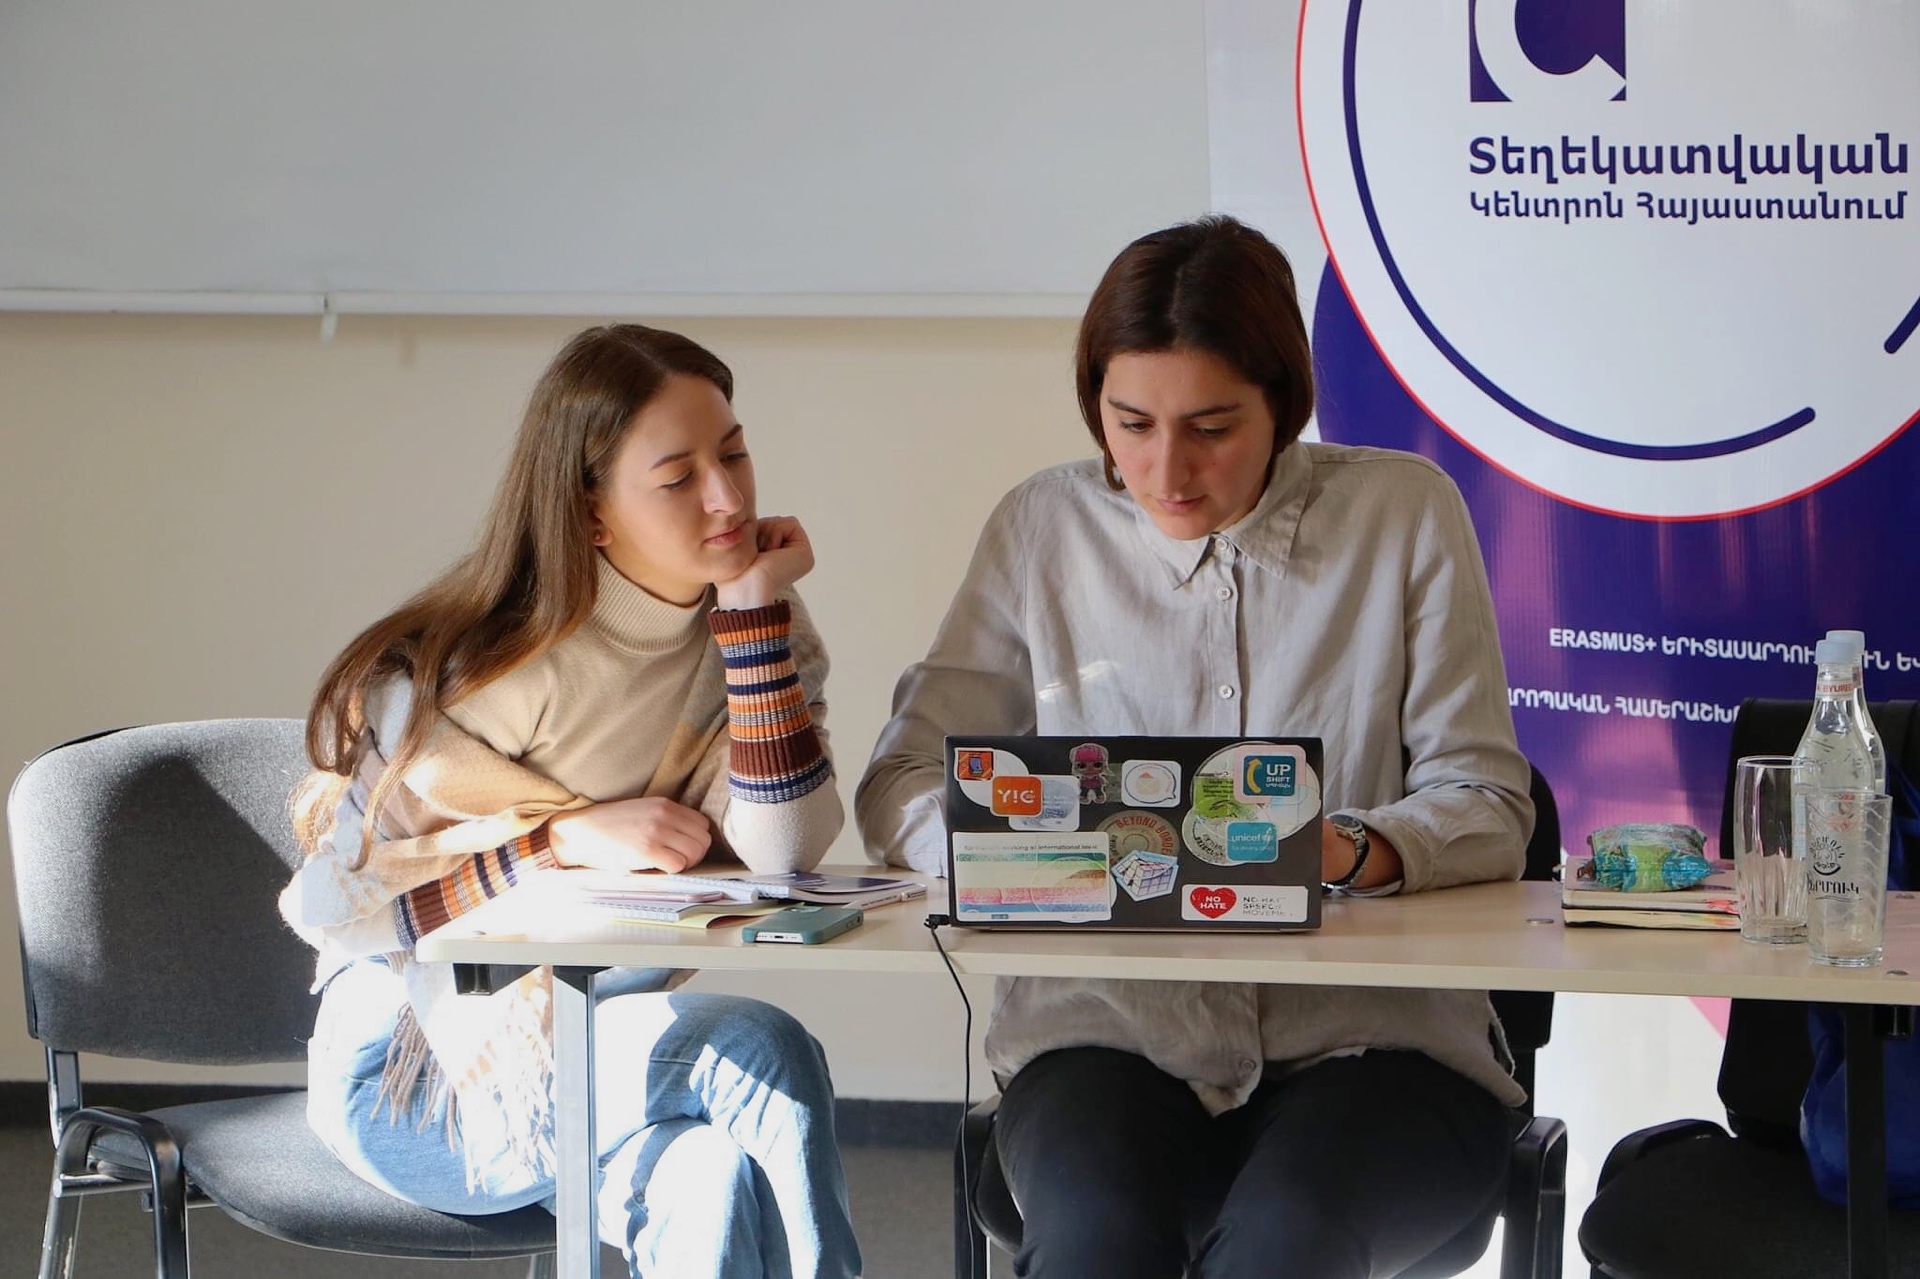 The EU4Youth Alumni connecting the dots between young Yazidis and Armenians in Aragatsotn